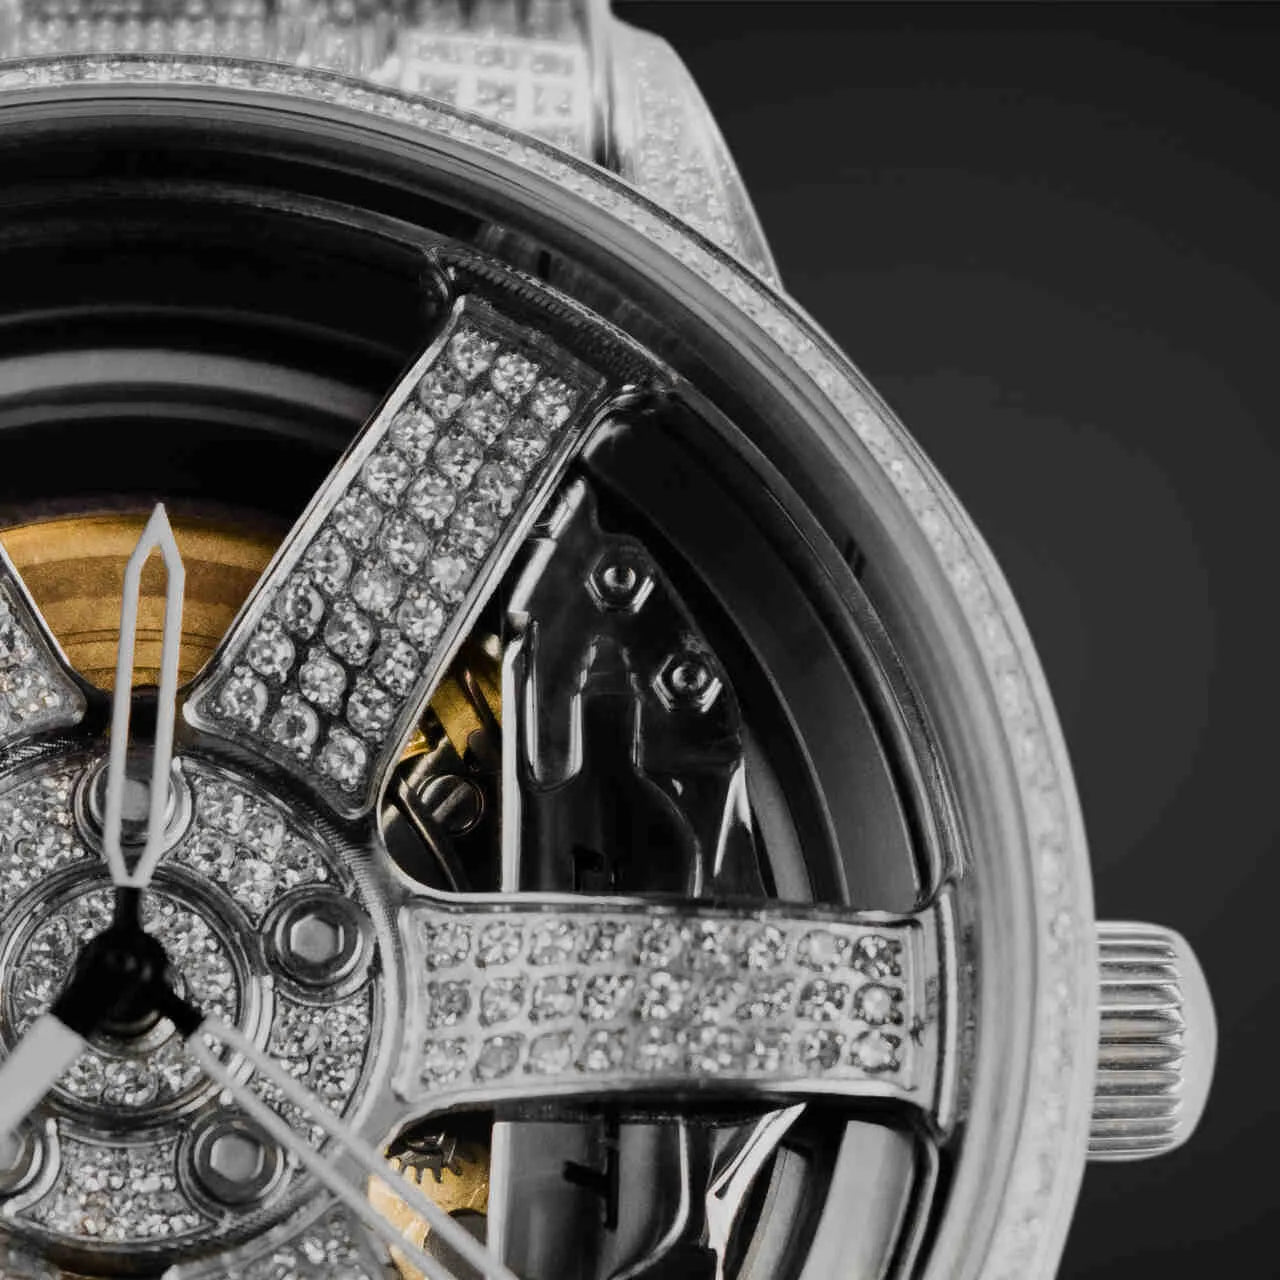 3RD ANNIVERSARY Orologio ICED OUT VVS-EDITION